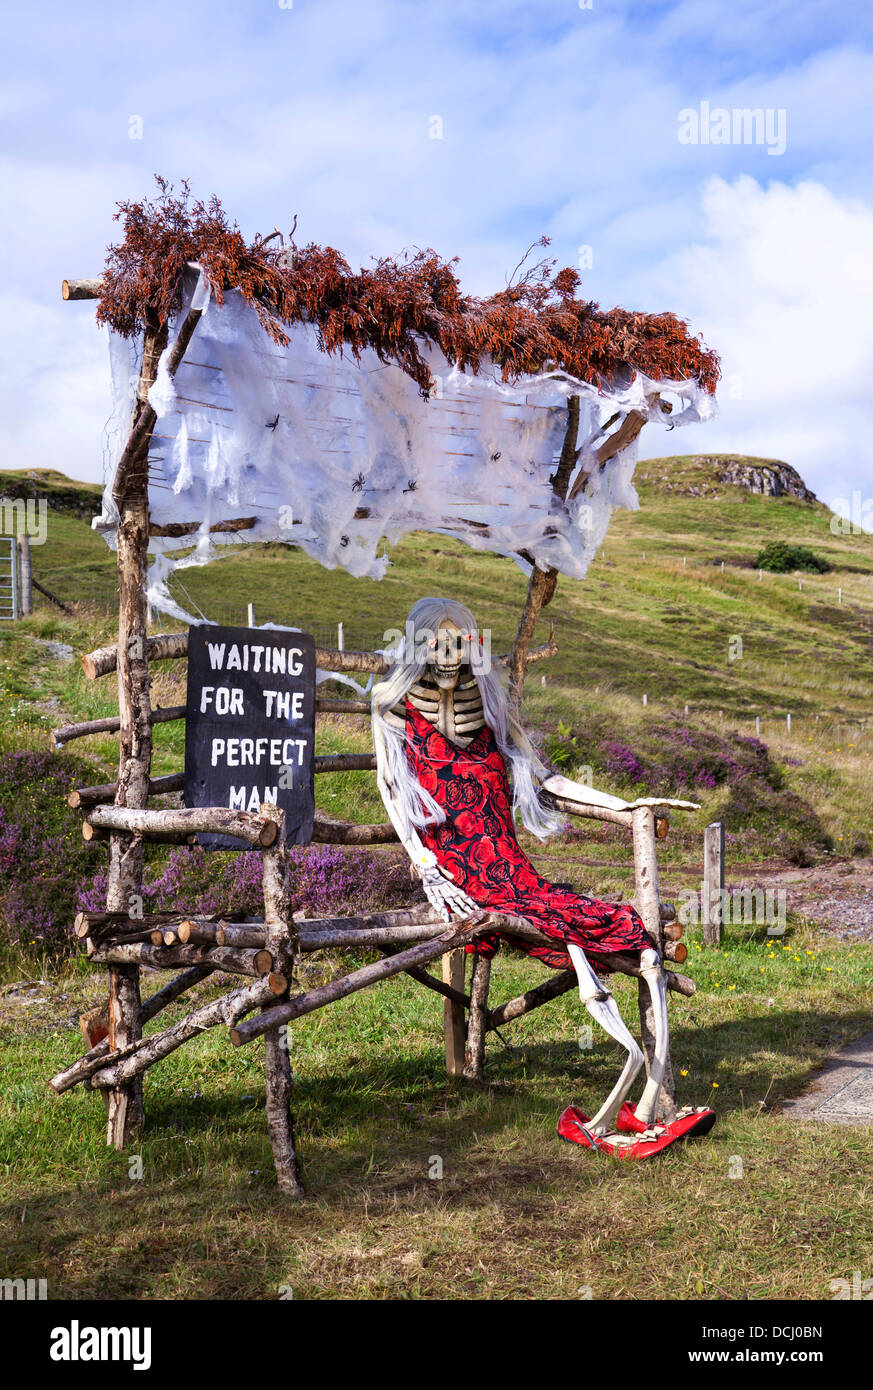 Waiting for the perfect man, Lonely Scary Skeleton in a red dress, sat on ricktey upcycled recycled wooden bench. Carbost, Isle of Skye, Scotland, UK Stock Photo